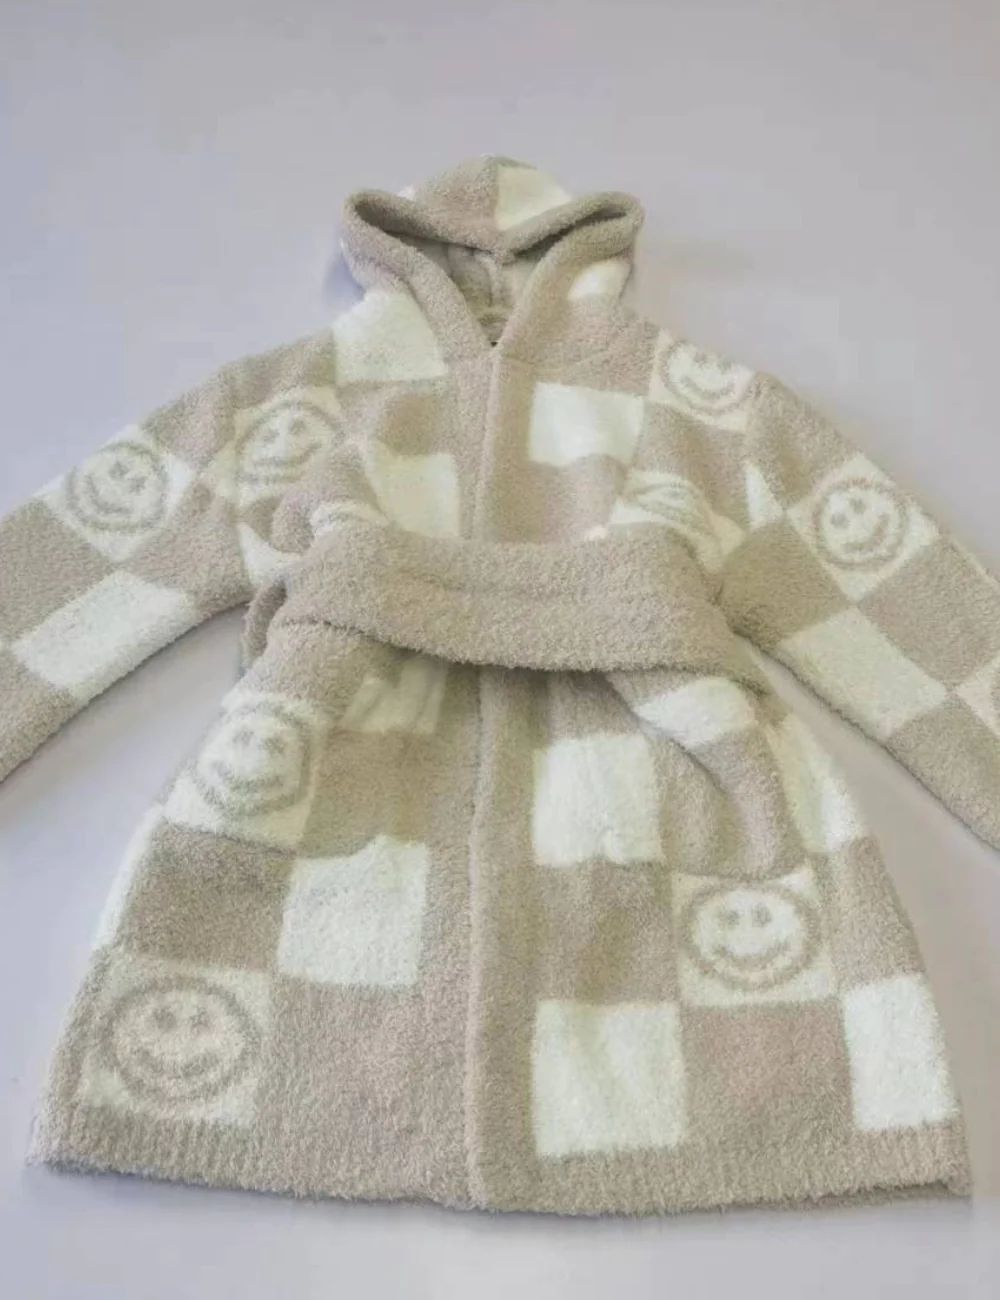 TSC x Tia Booth: Checkered Smiley Children's Robe | The Styled Collection